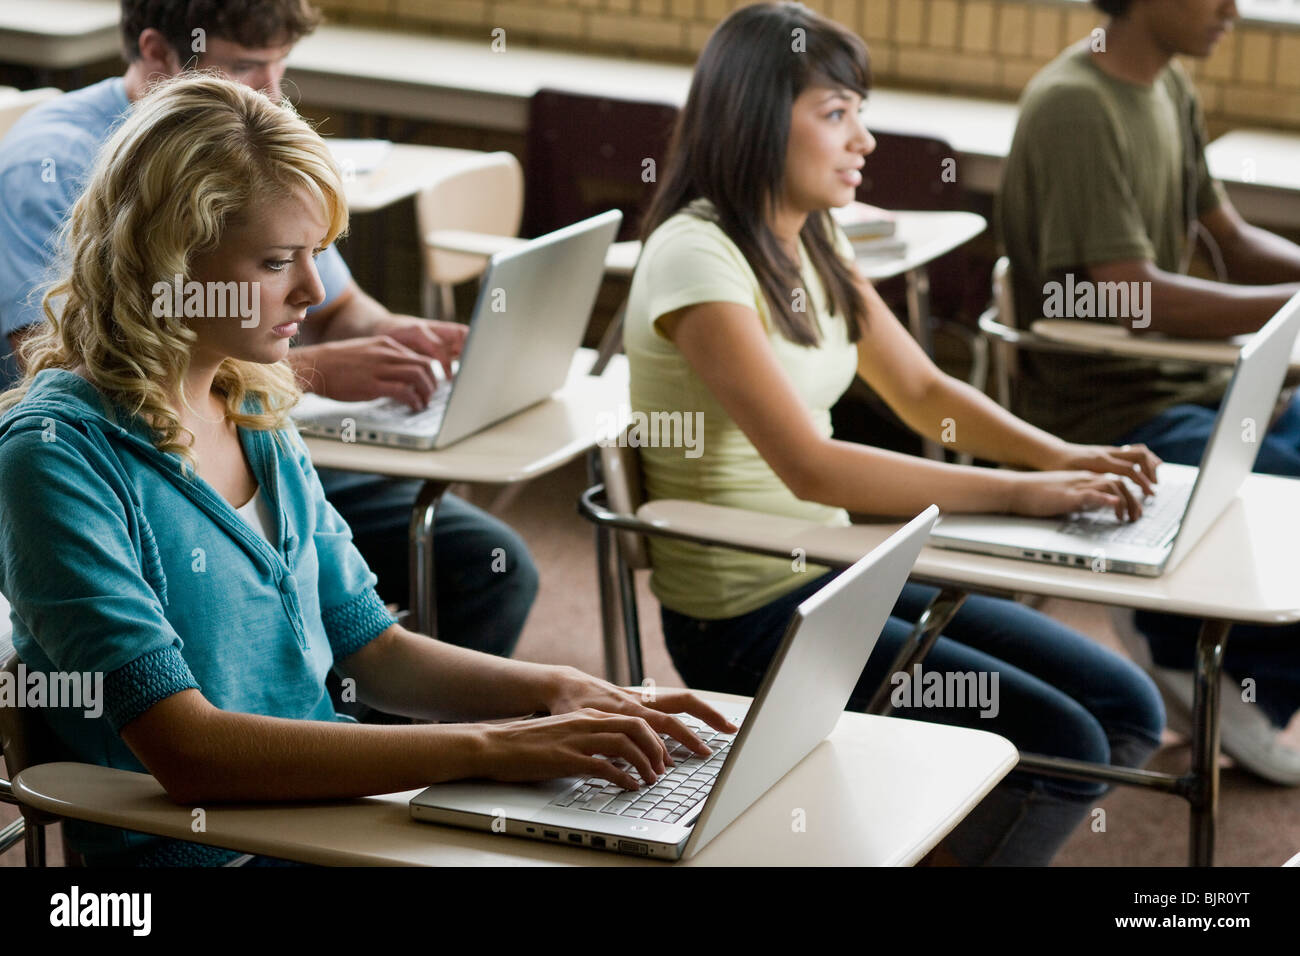 Four students working on notebook computers. Stock Photo